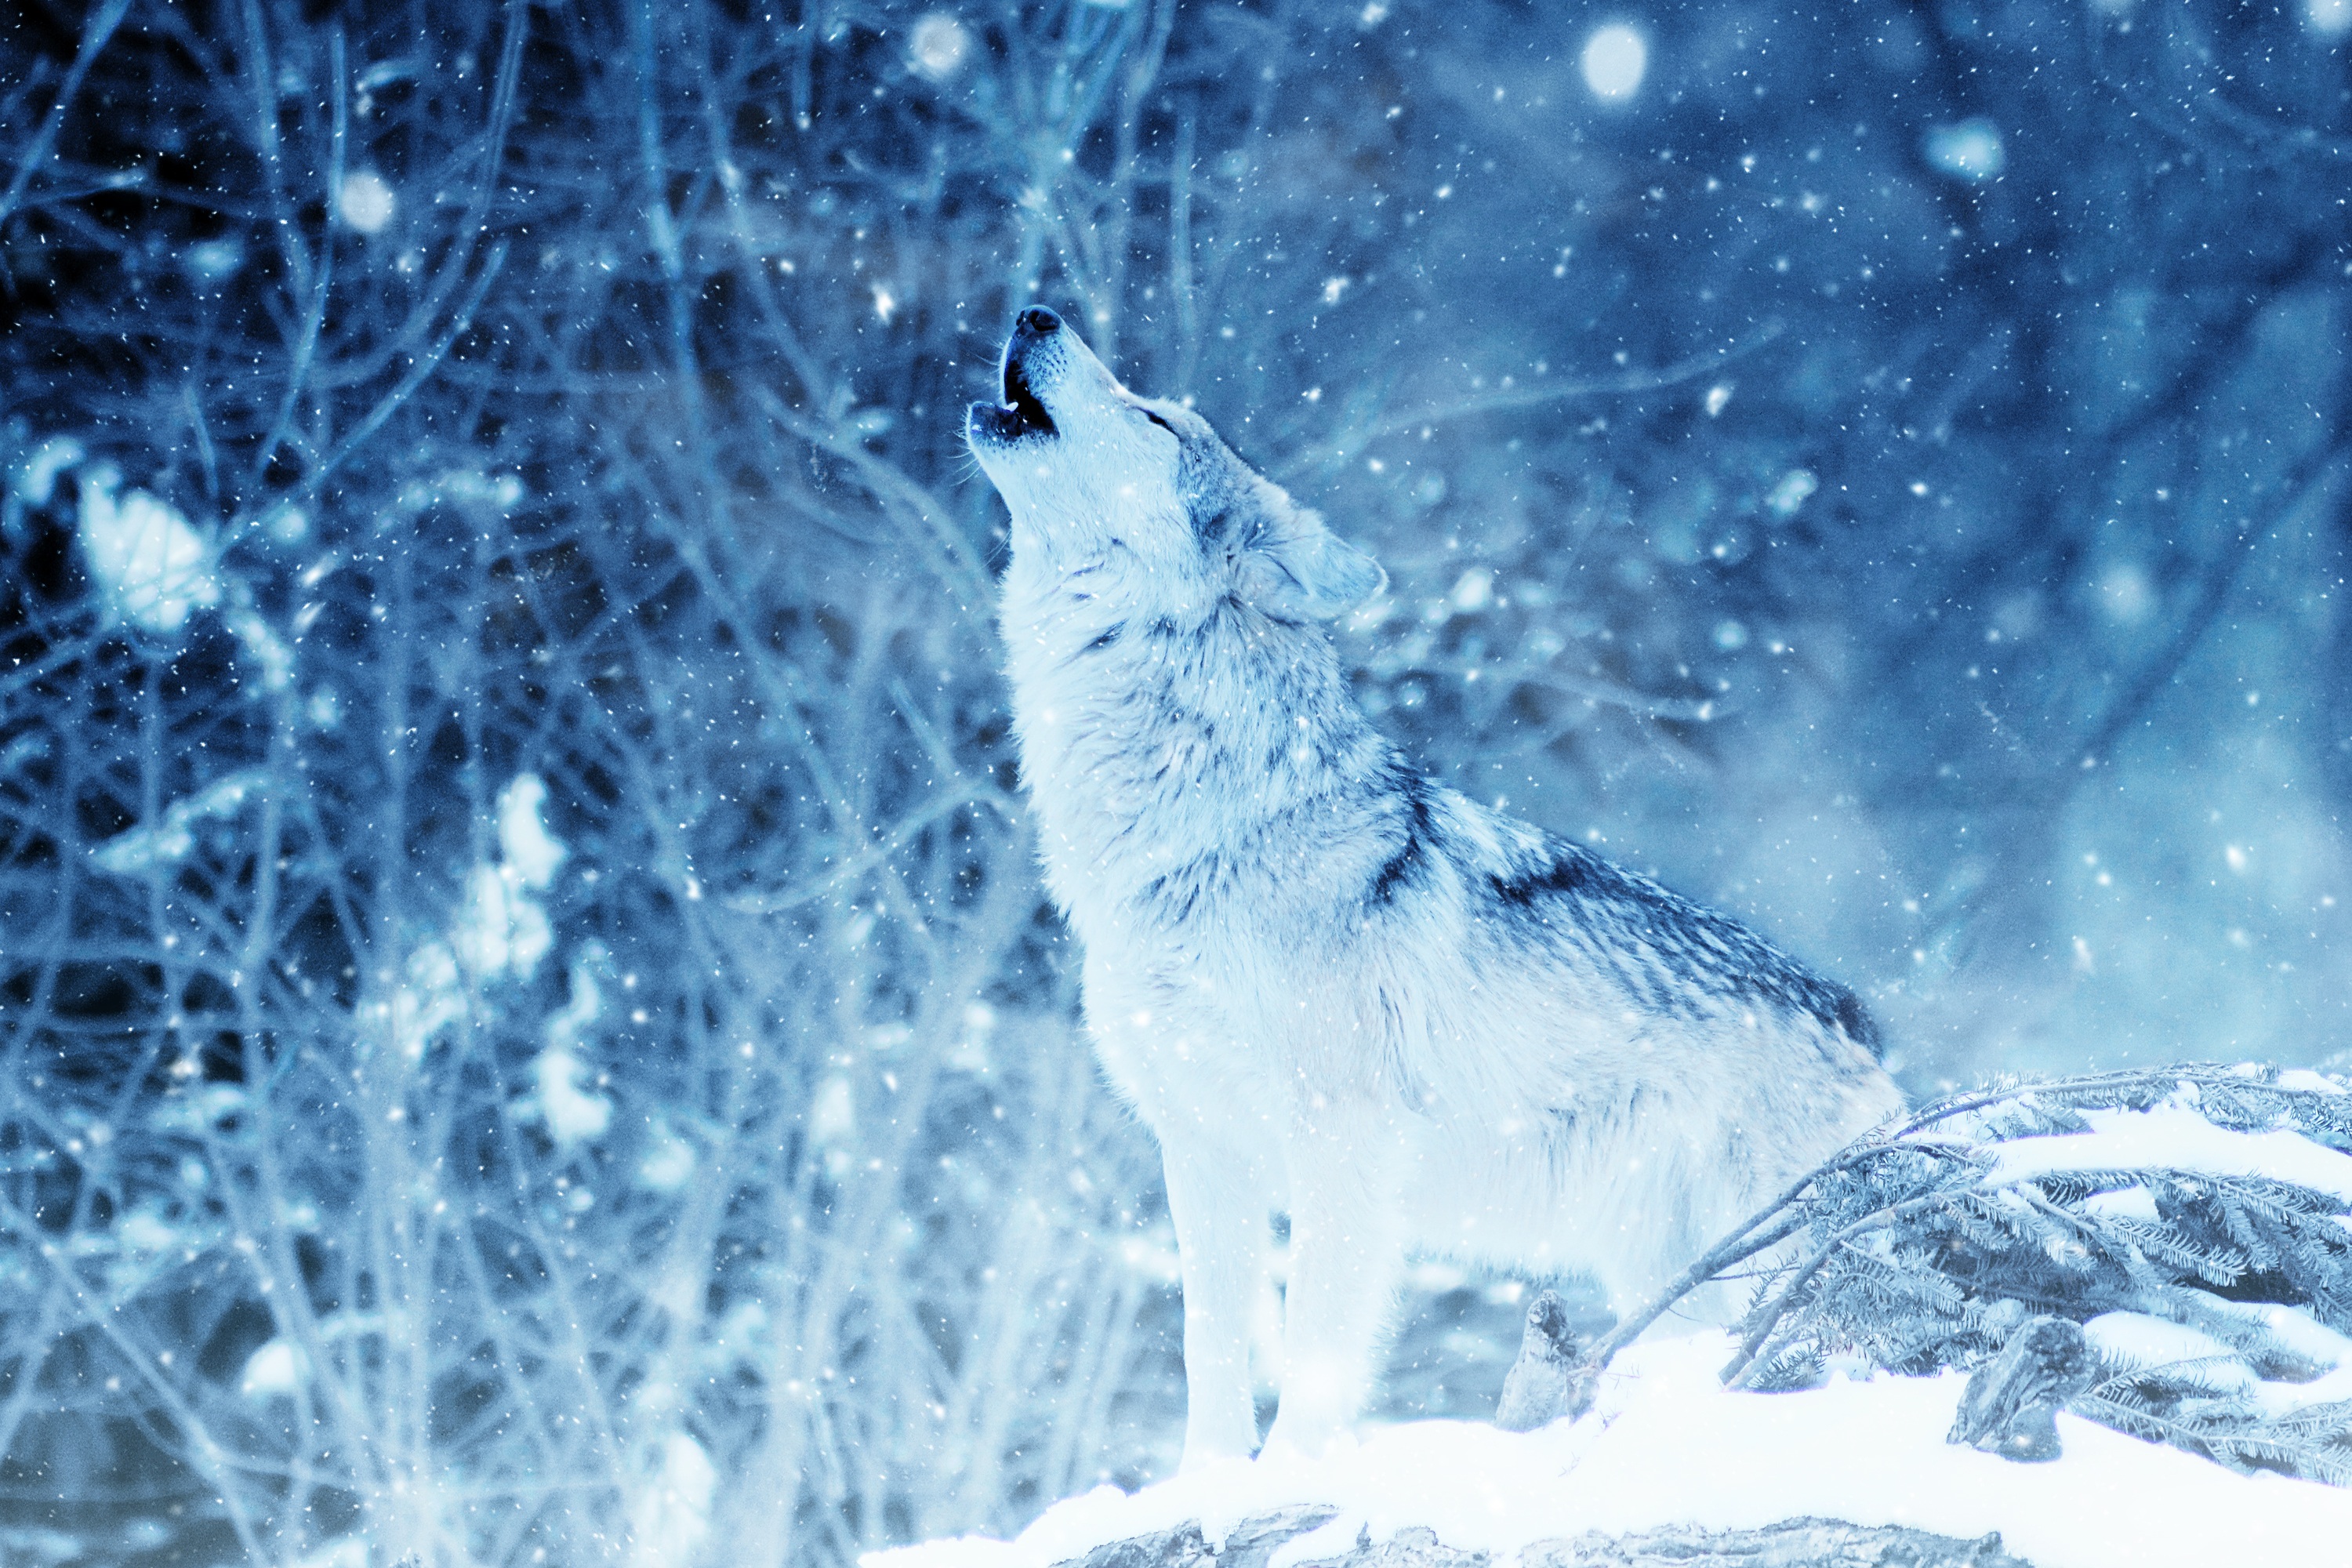 Wolf Howling in the Winter Snow by ractapopulous